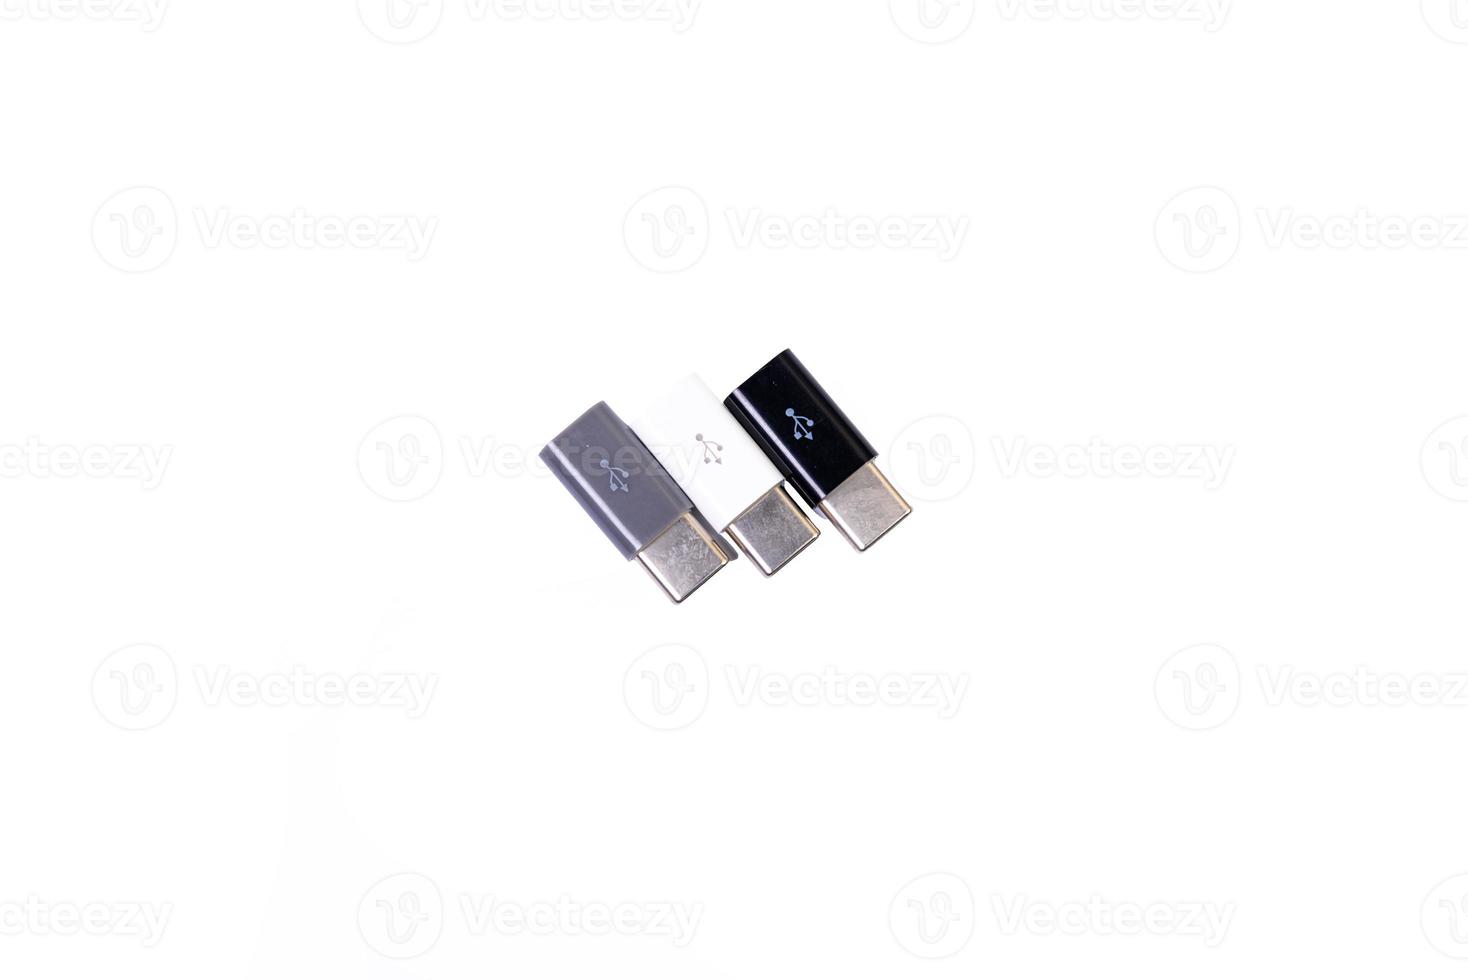 various converter cables adapters for computers and smartphones HDMI VGA USB DVI DP isolated on white photo